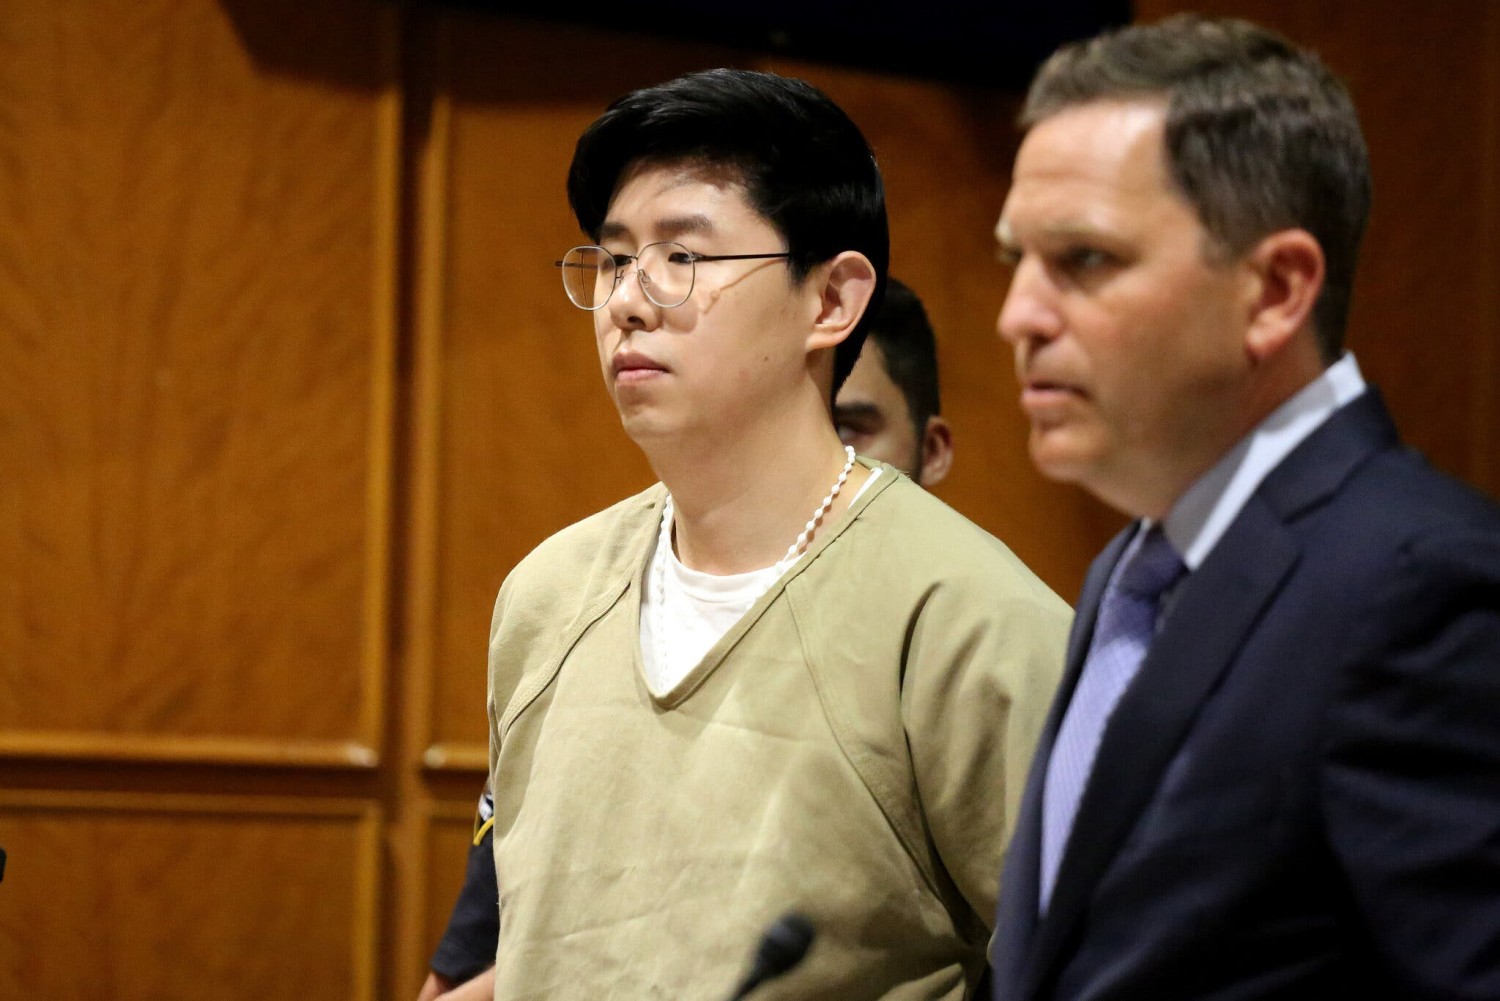 Zhi Alan Cheng was arraigned at criminal court in Queens on Monday, where he was charged with raping and sexually abusing patients and dating partners.Credit...Jefferson Siegel for The New York Times